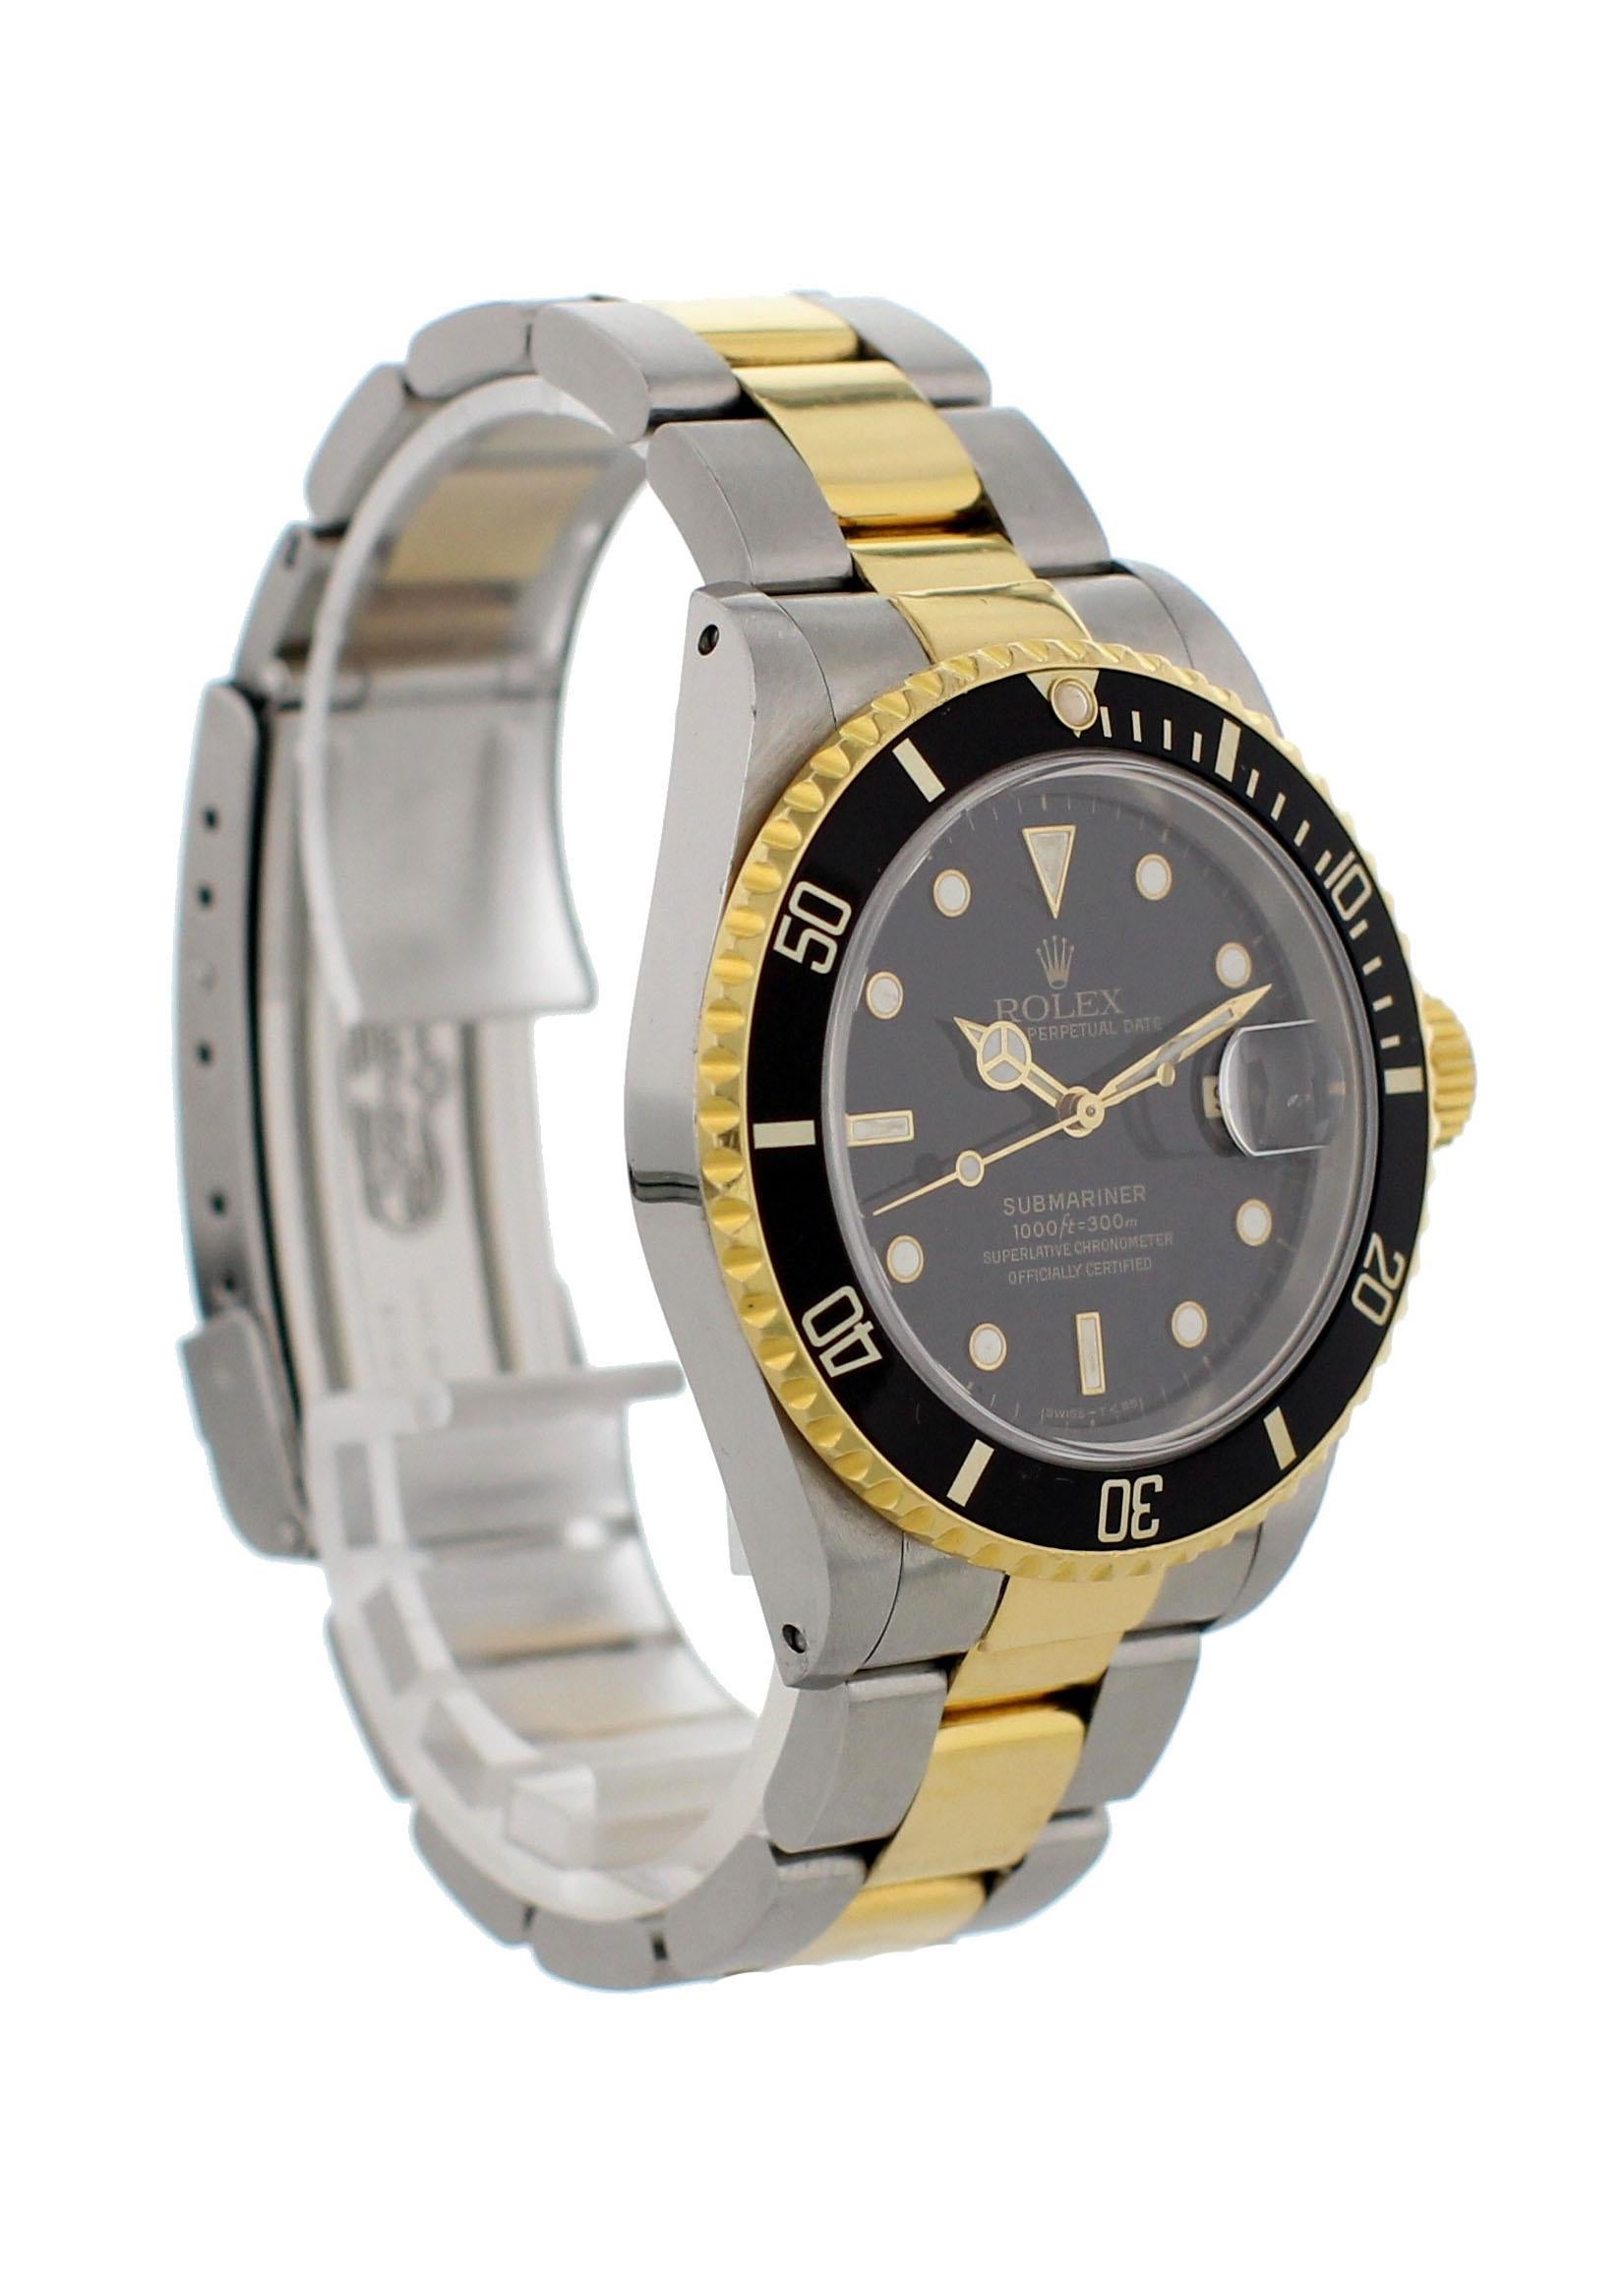 Rolex Oyster Perpetual Submariner Date 16613 Men’s Watch In Excellent Condition For Sale In New York, NY